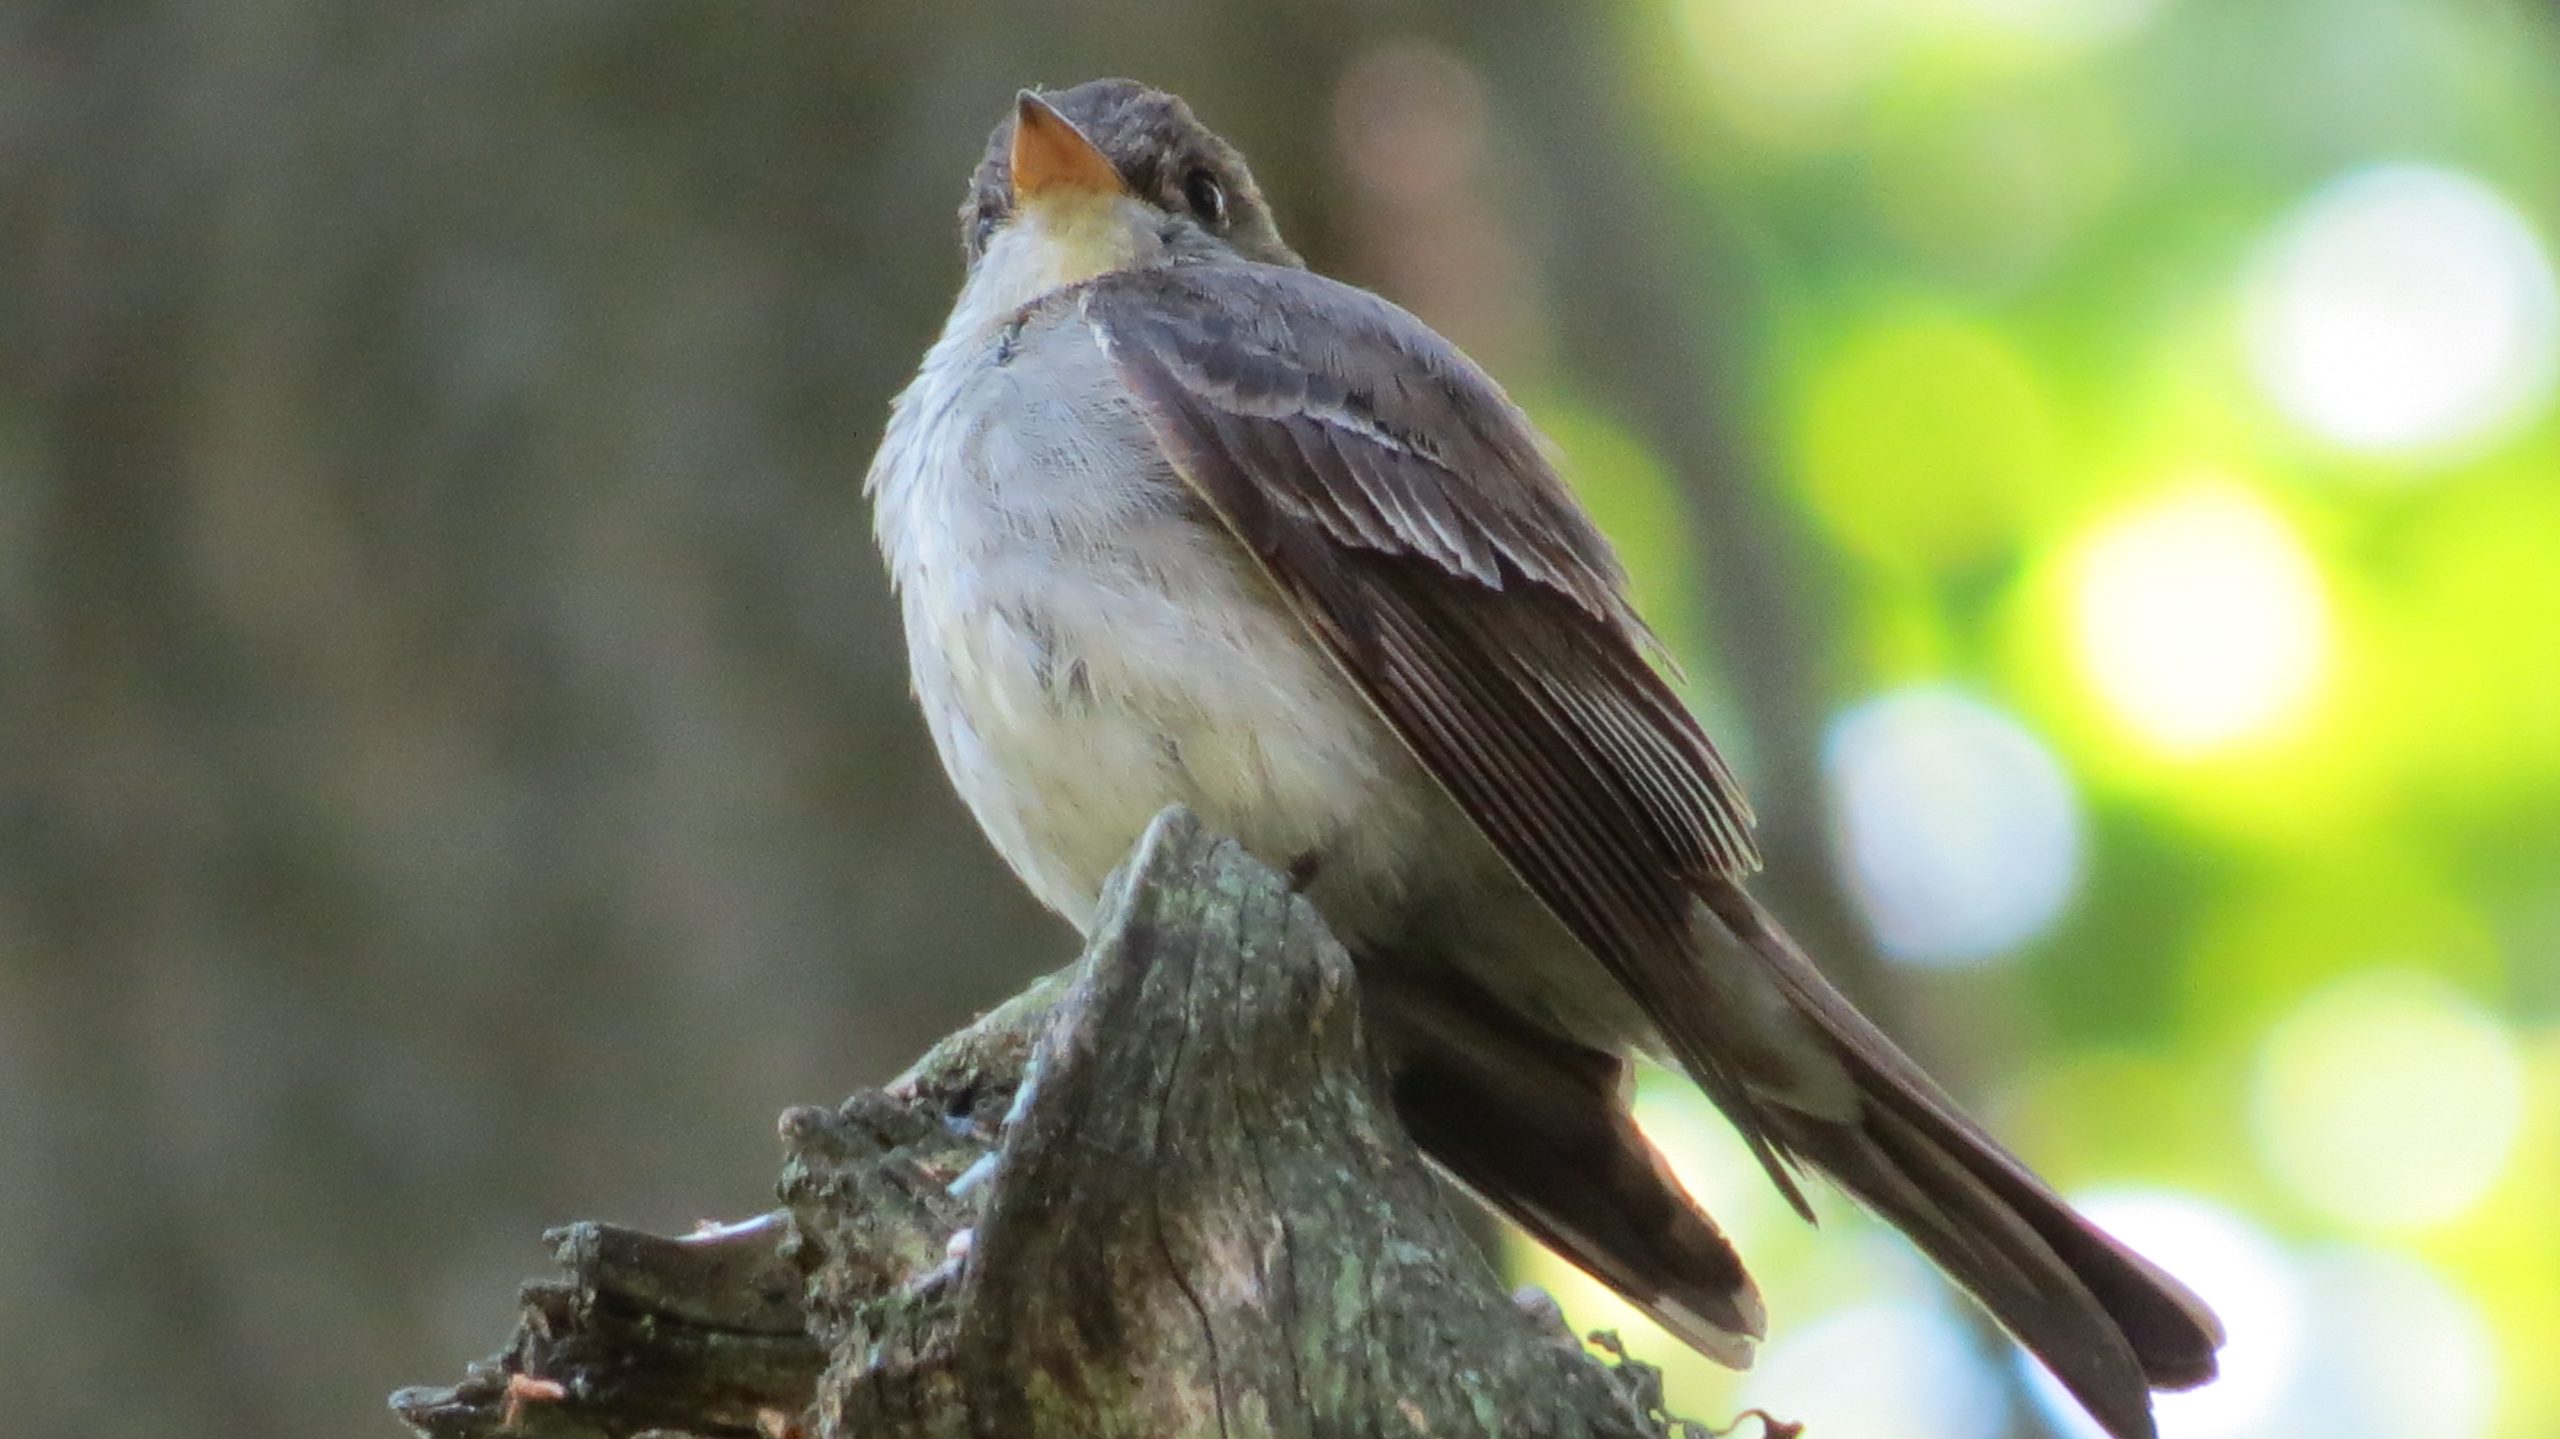 Eastern Wood-Pewee, white and grey, perches on a piece of wood in Tommy Thompson Park